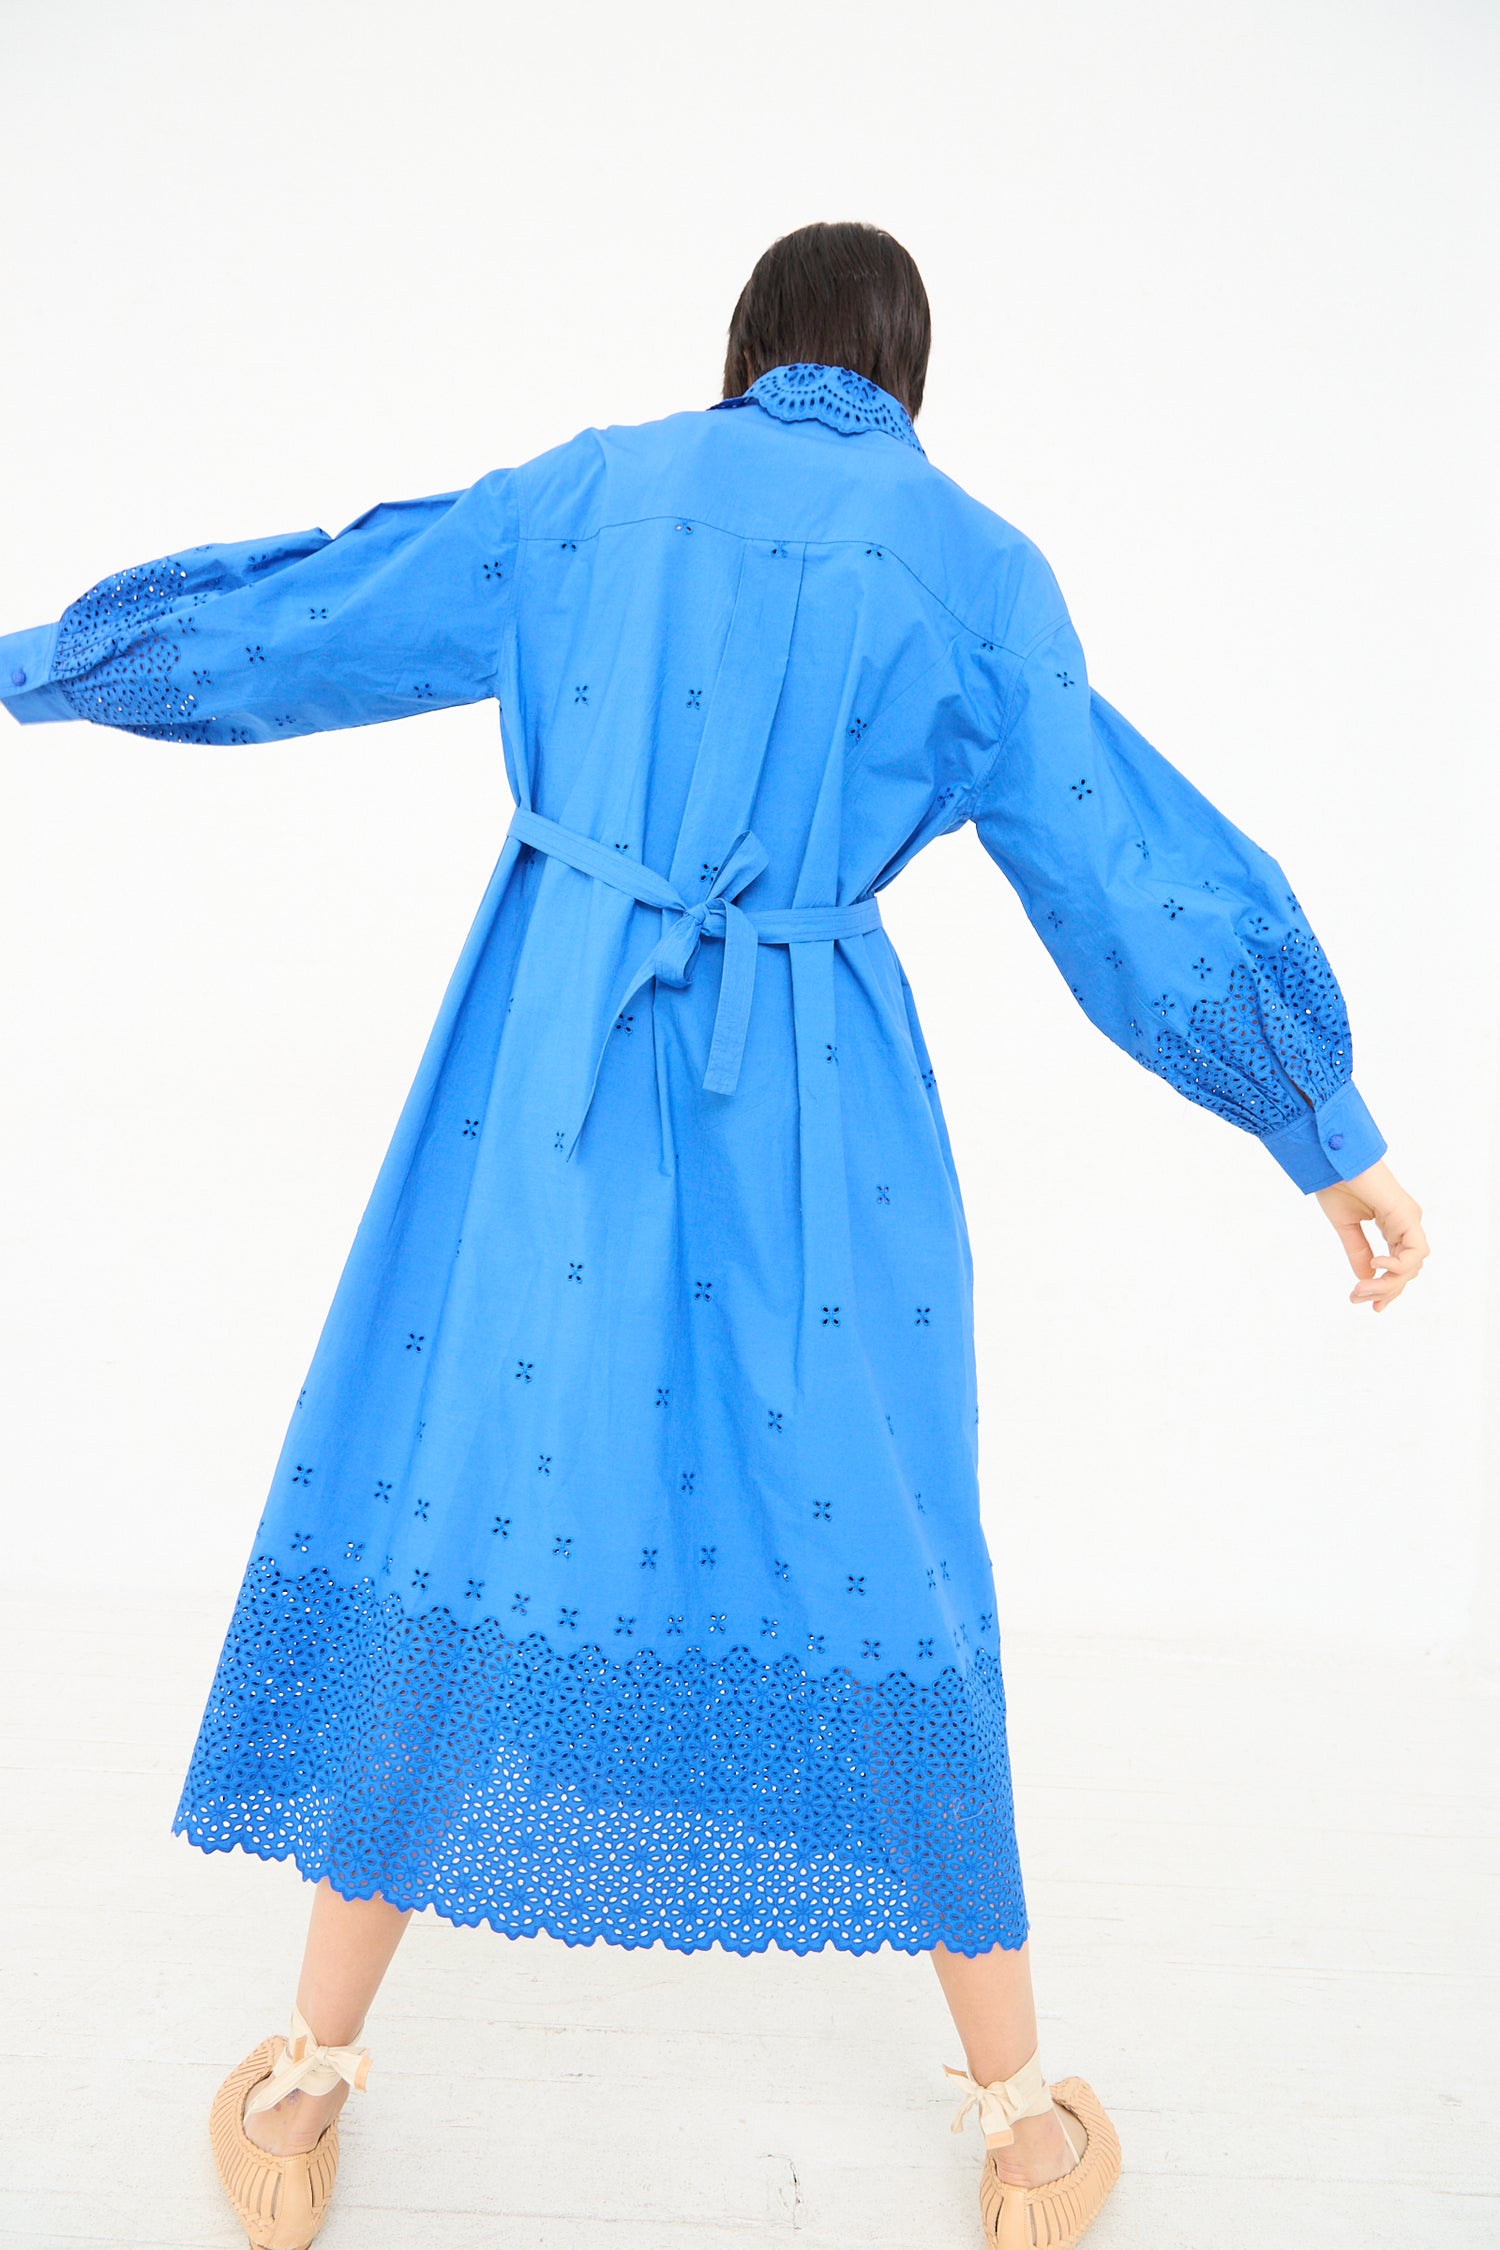 Woman in a Ulla Johnson Adette Dress in Cobalt with eyelet design cut-out patterns, seen from the back, twirling.